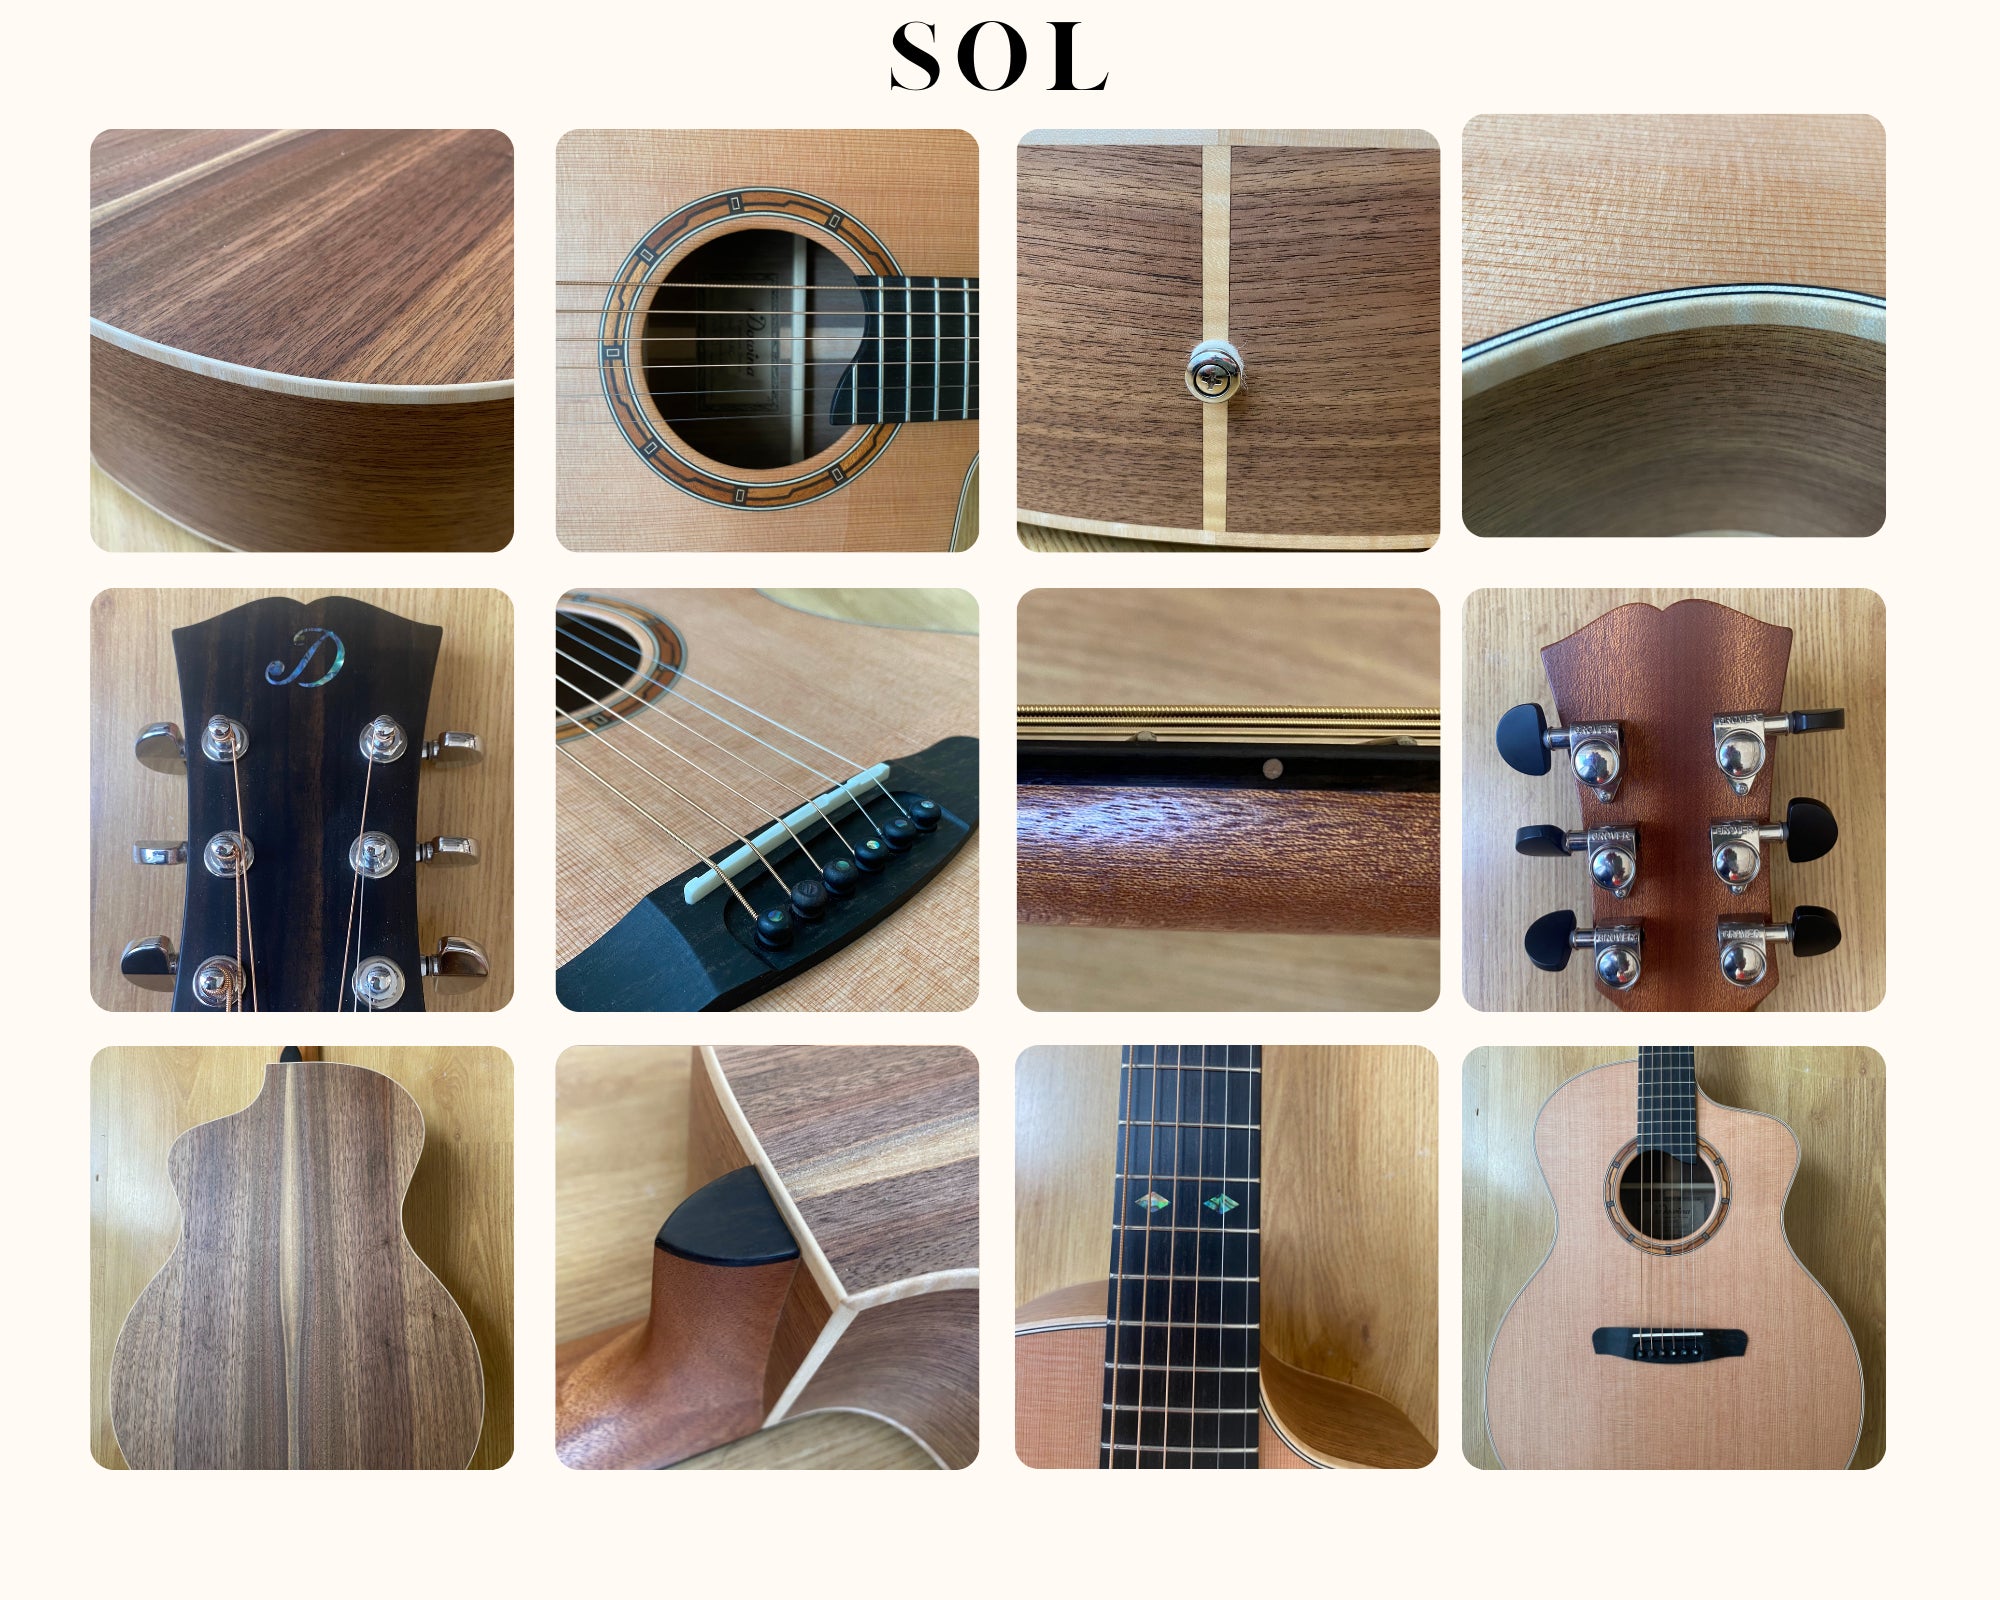 Dowina Walnut (Sol)  DCE-DS, Electro Acoustic Guitar for sale at Richards Guitars.